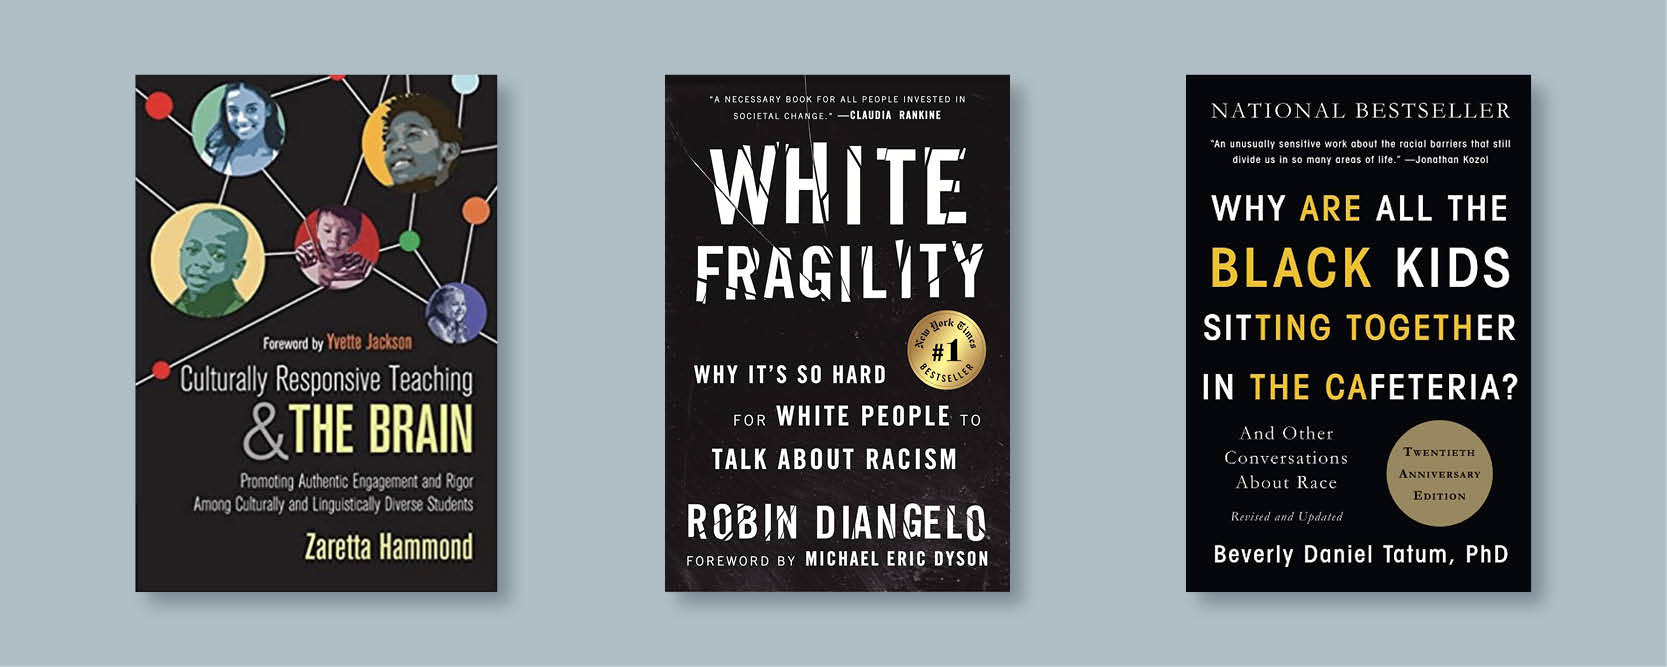 Book covers of Culturally Responsive Teaching and the Brain, White Fragility and Why are all the black kids sitting together in the cafeteria